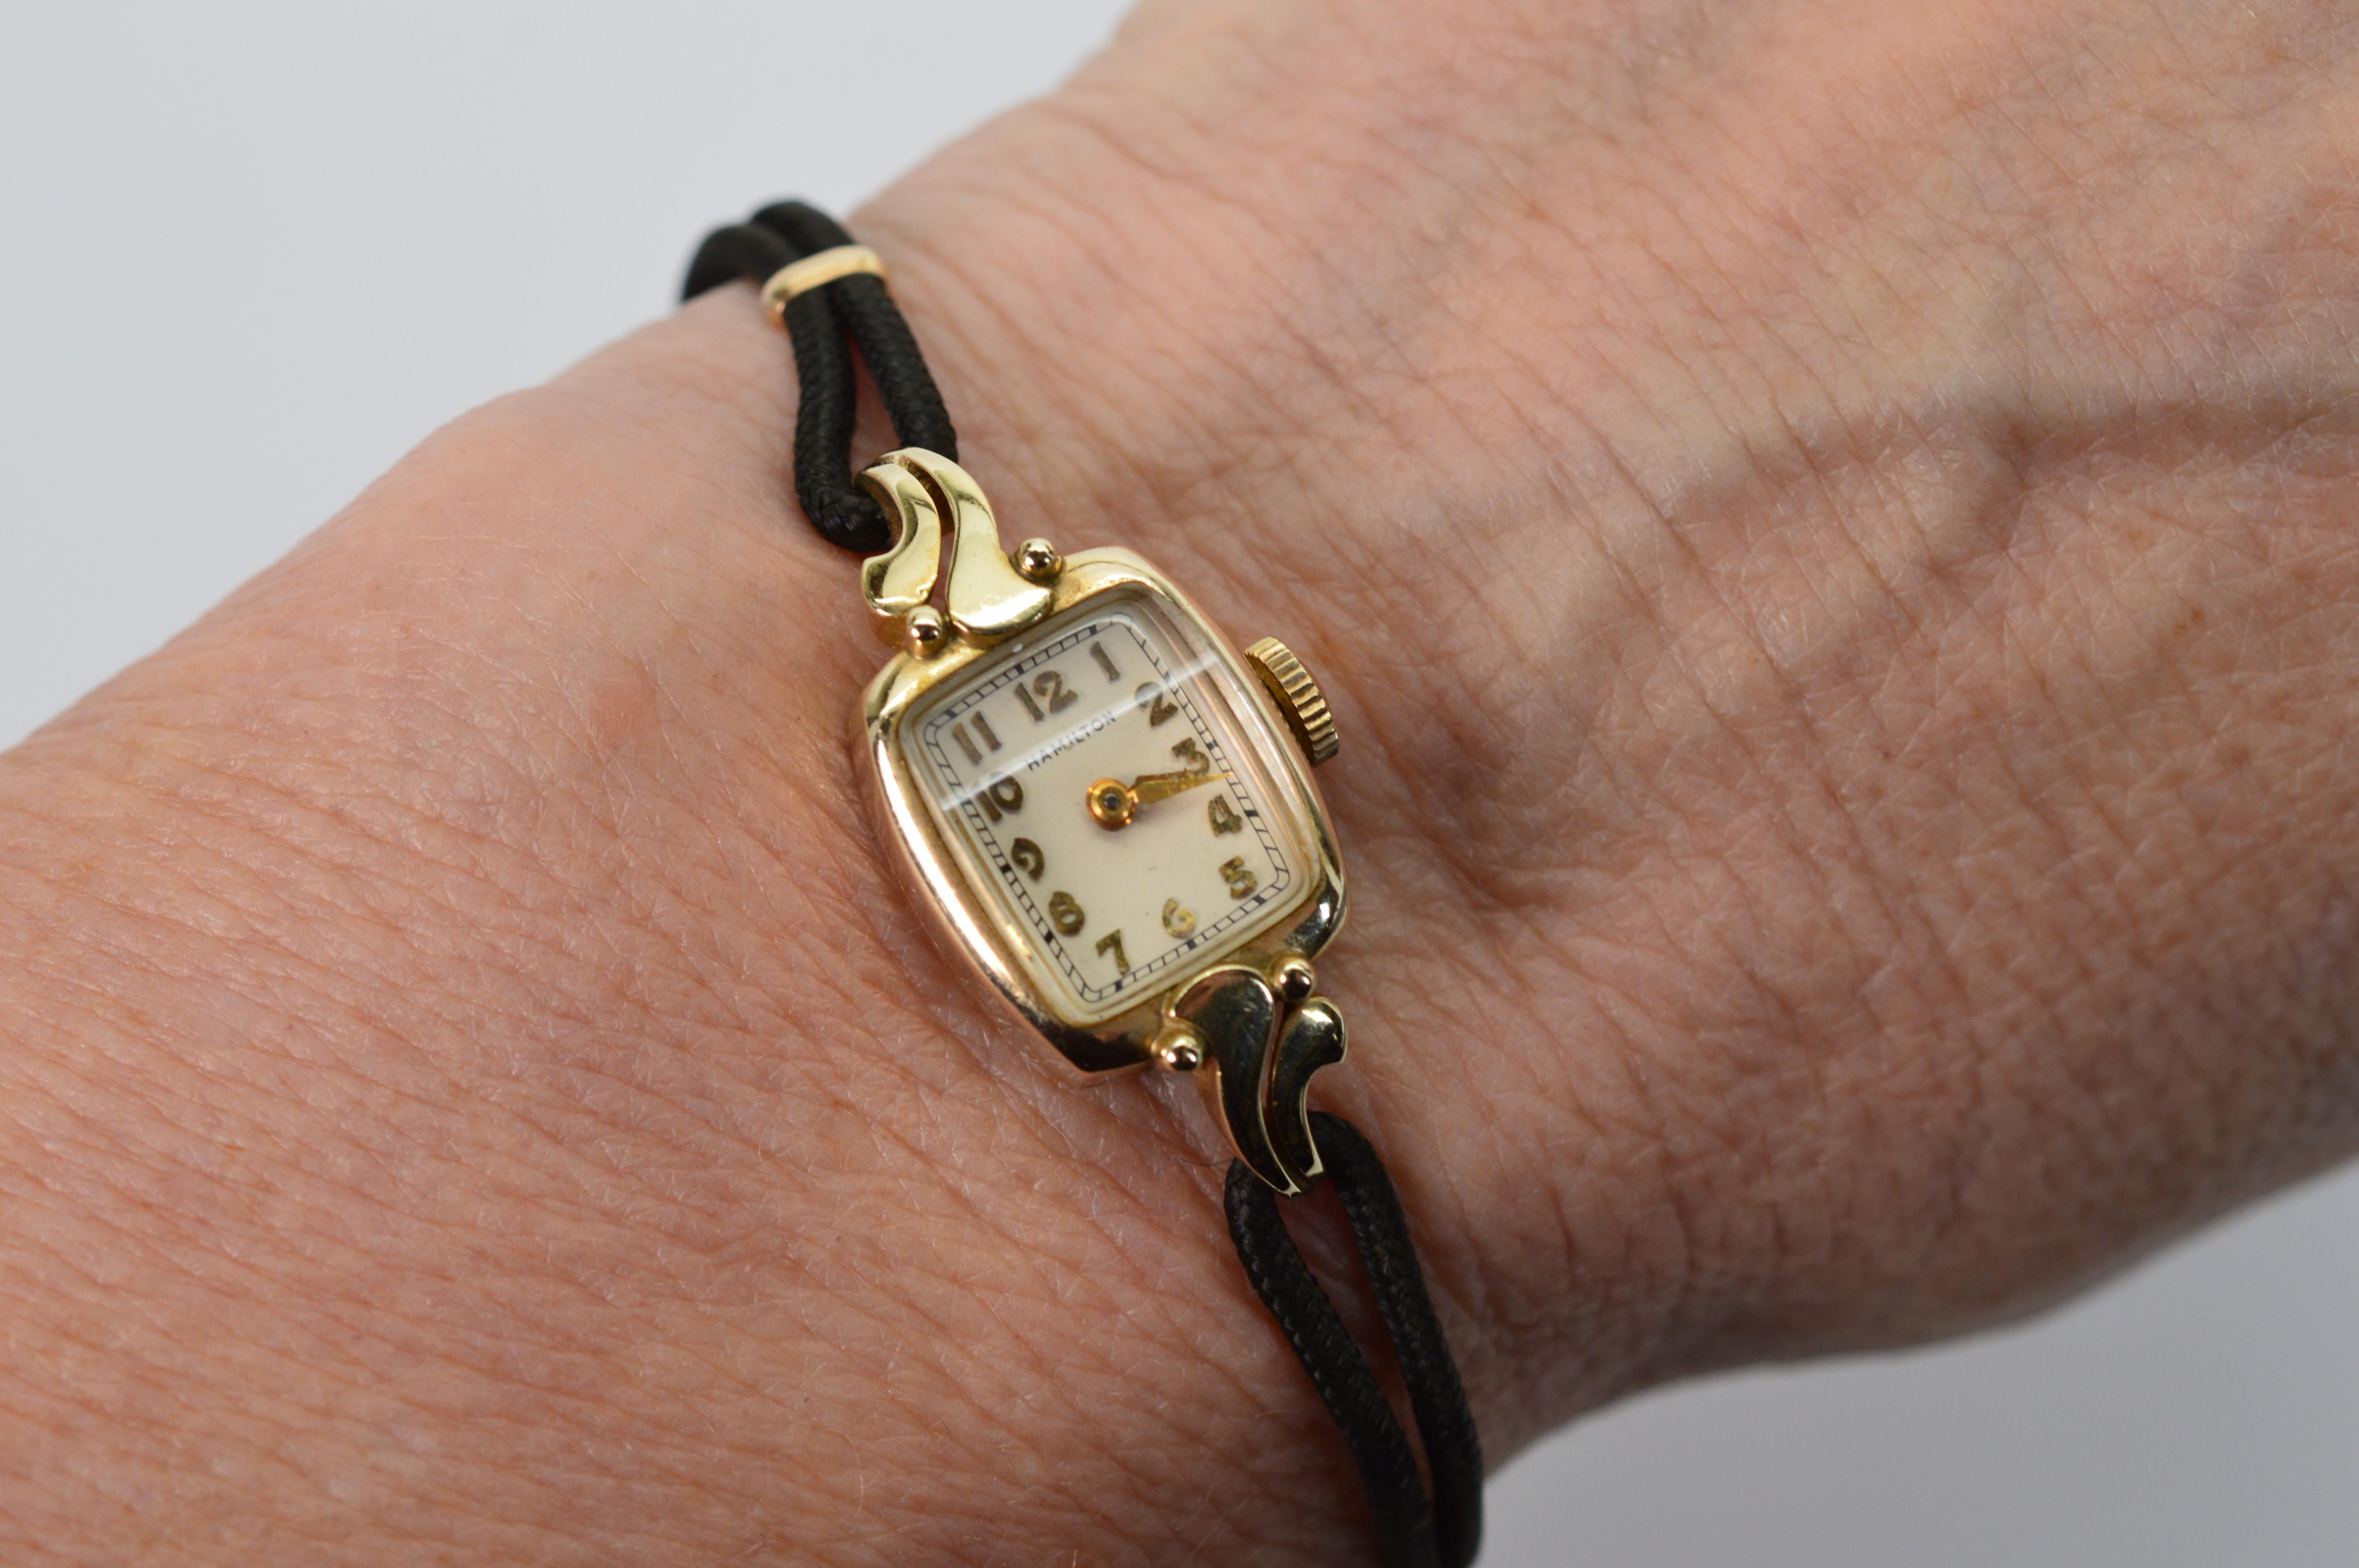 Understated 1950s fashion , enjoy this ten karat 10K Yellow Gold Ladies Hamilton 750  Vintage Watch. Delicate features along with antique imperfections make this a charming piece. Has a 17 jeweled manual wind movement and black Hadley rope bracelet